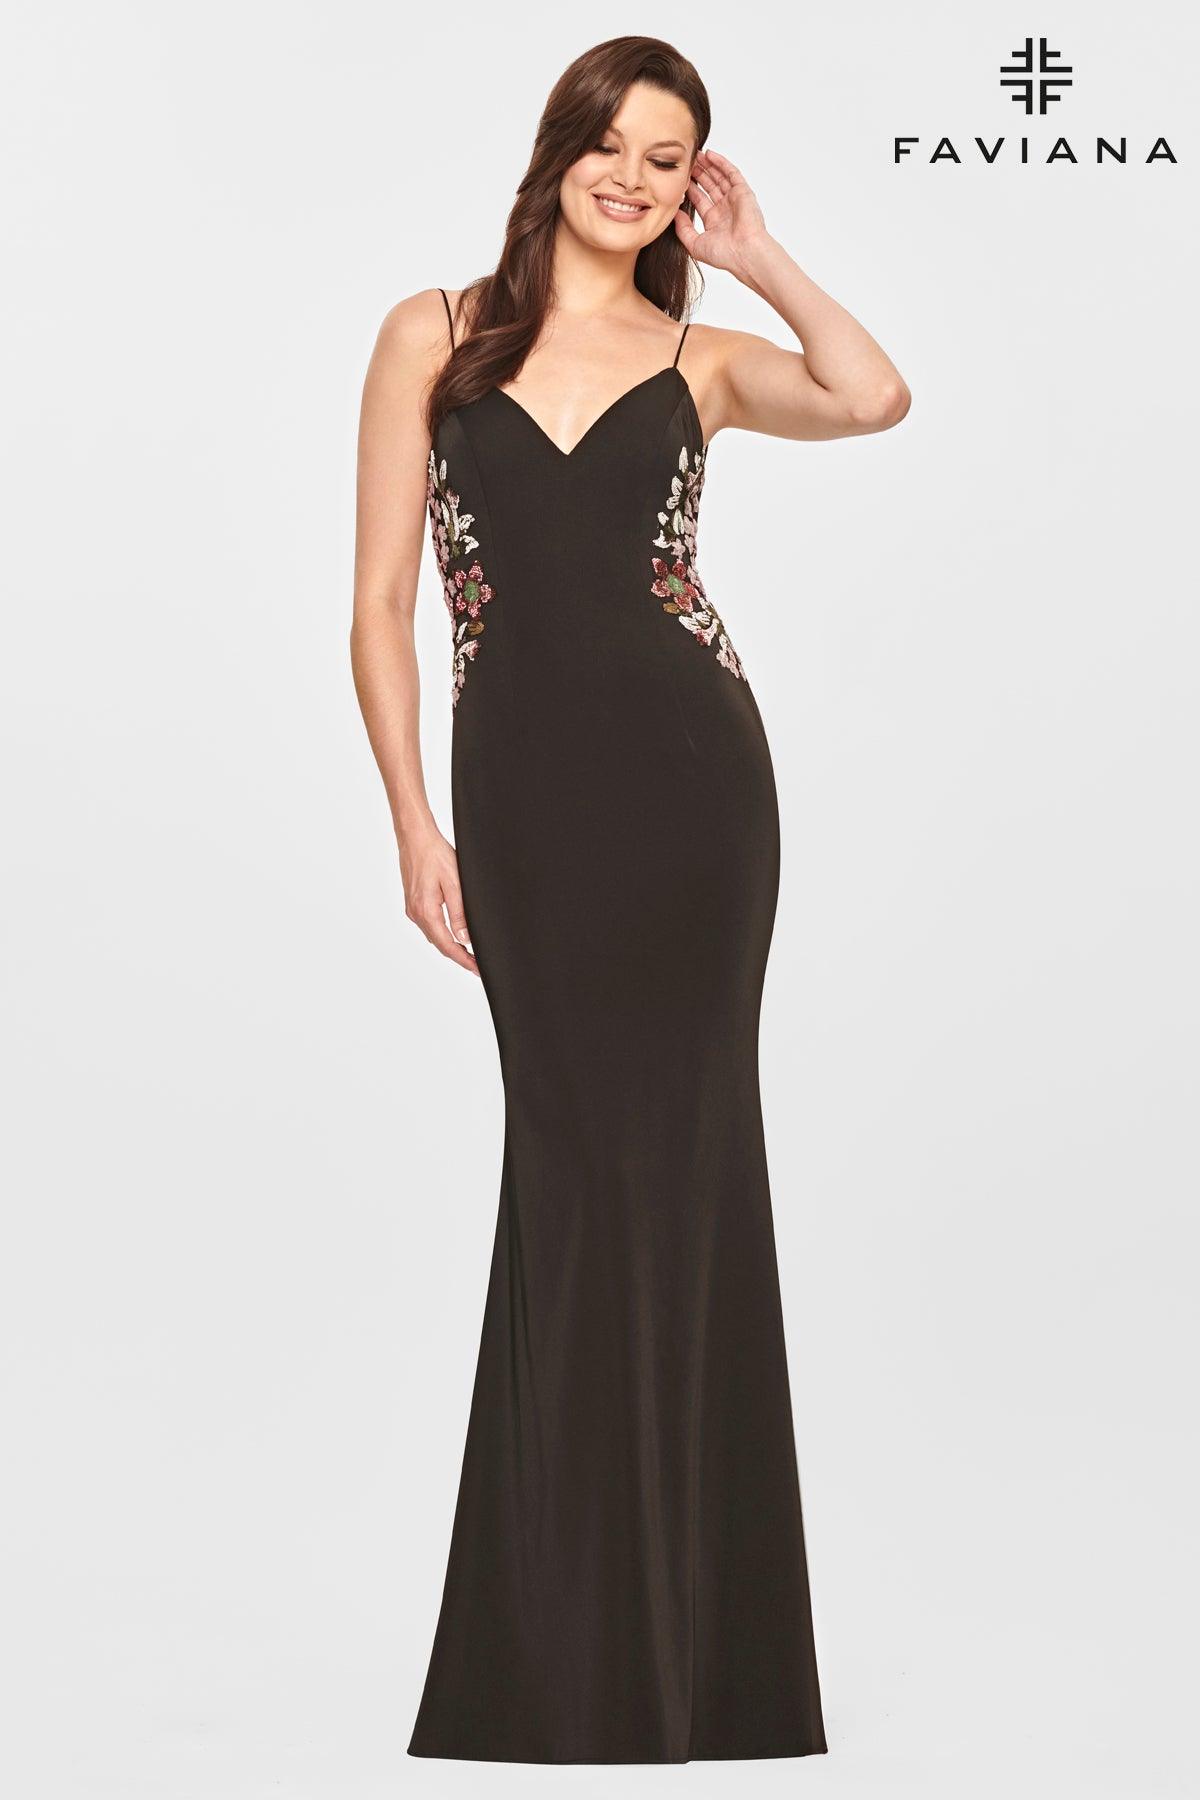 Faviana S10859 Long Formal Fitted Prom Dress